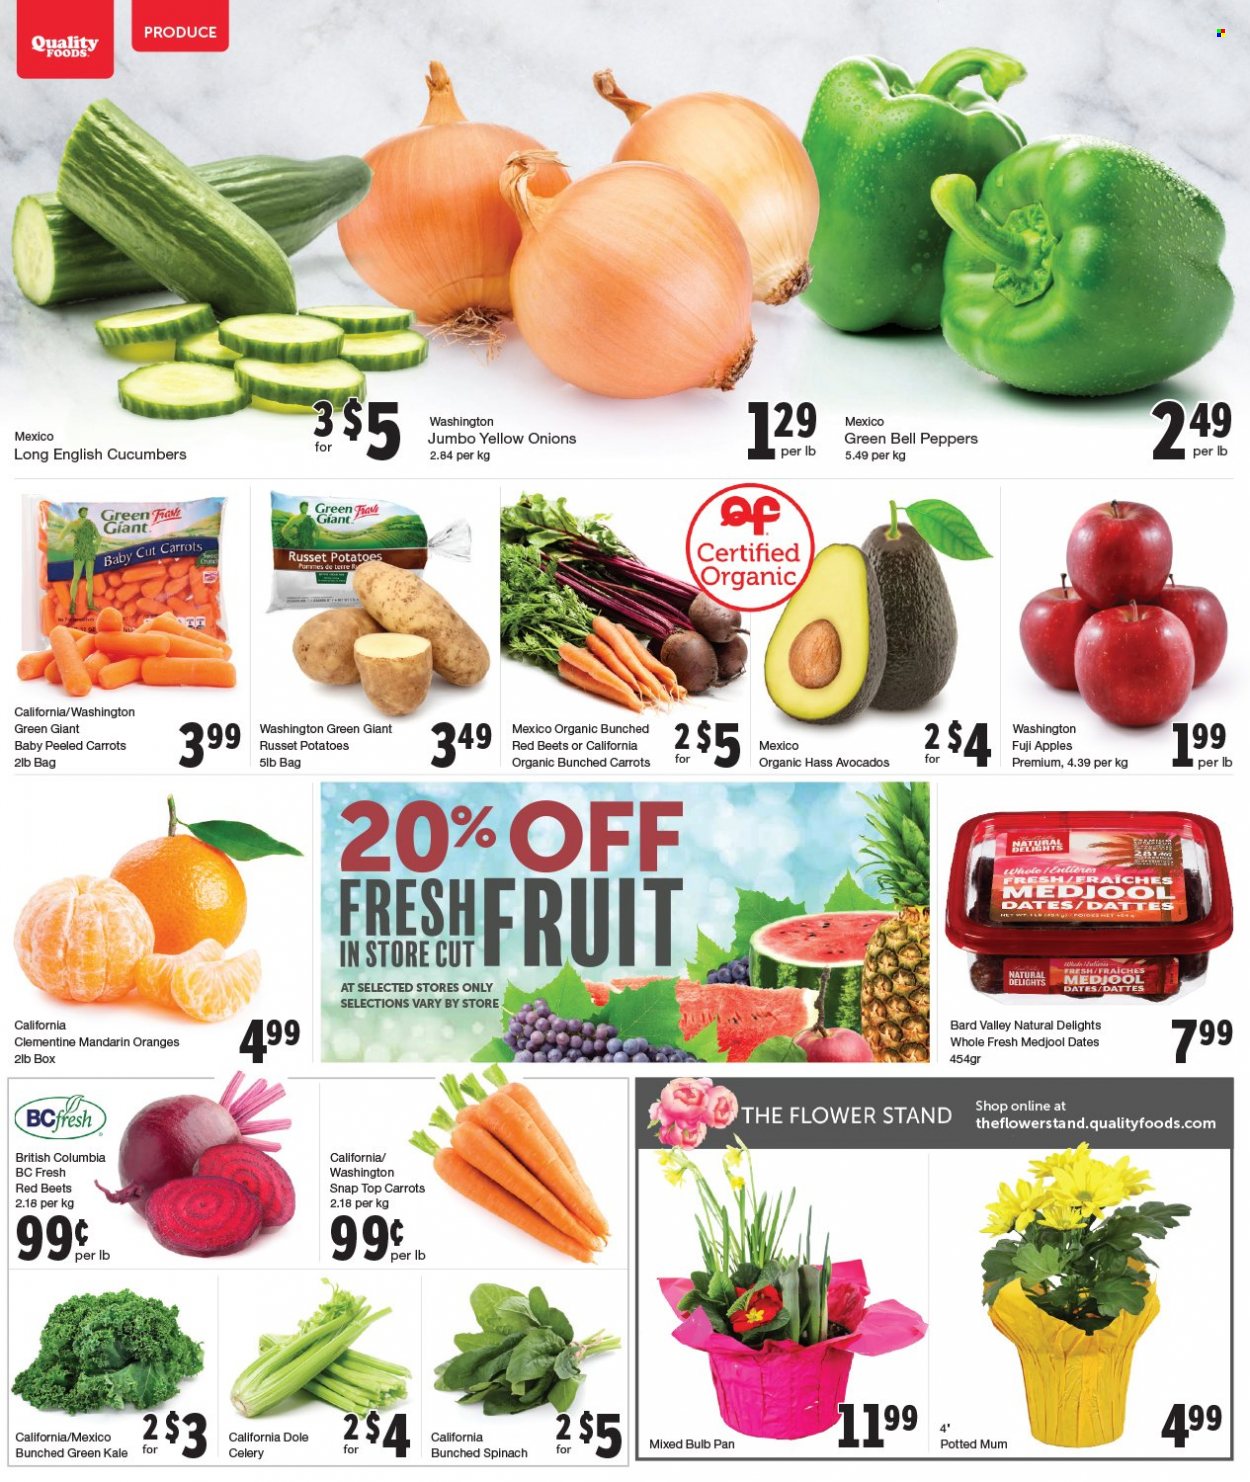 thumbnail - Quality Foods Flyer - January 10, 2022 - January 16, 2022 - Sales products - bell peppers, carrots, celery, cucumber, russet potatoes, spinach, kale, potatoes, onion, Dole, apples, avocado, mandarines, Fuji apple, fresh dates, Mum, pan, bulb, oranges. Page 2.